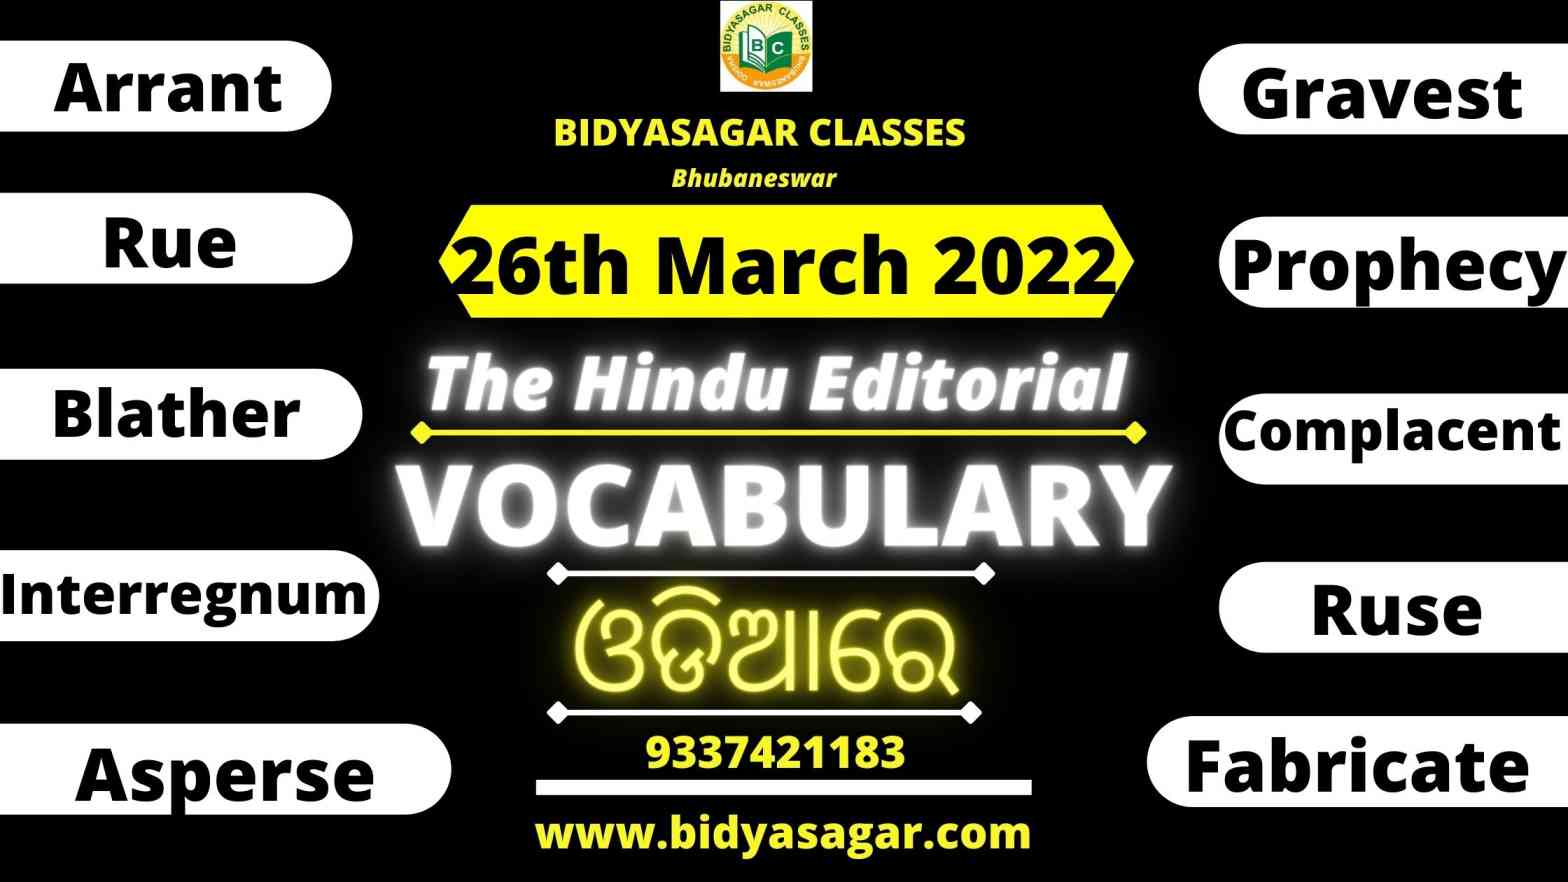 The Hindu Editorial Vocabulary of 26th March 2022